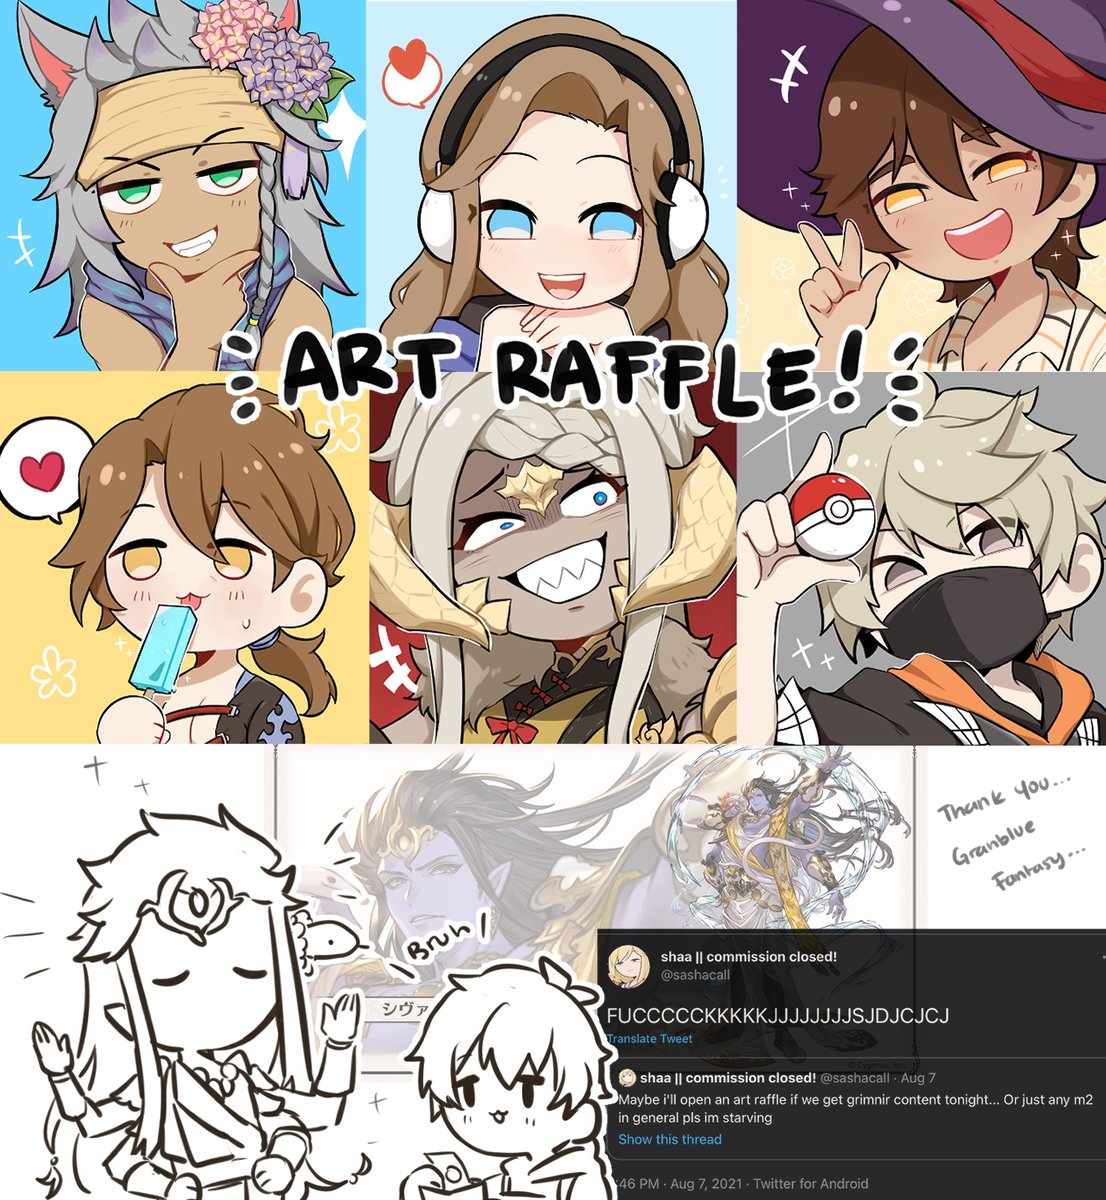 hi i'm opening an art raffle as promised, thanks to granblue and their shiva summer 🙏🙏
- RT and follow only, 1 winner from random generator
- winner will get an icon art (samples below)
- (optional) comment your fav granblue character/s
- deadline: 15 August 2021
good luck! 